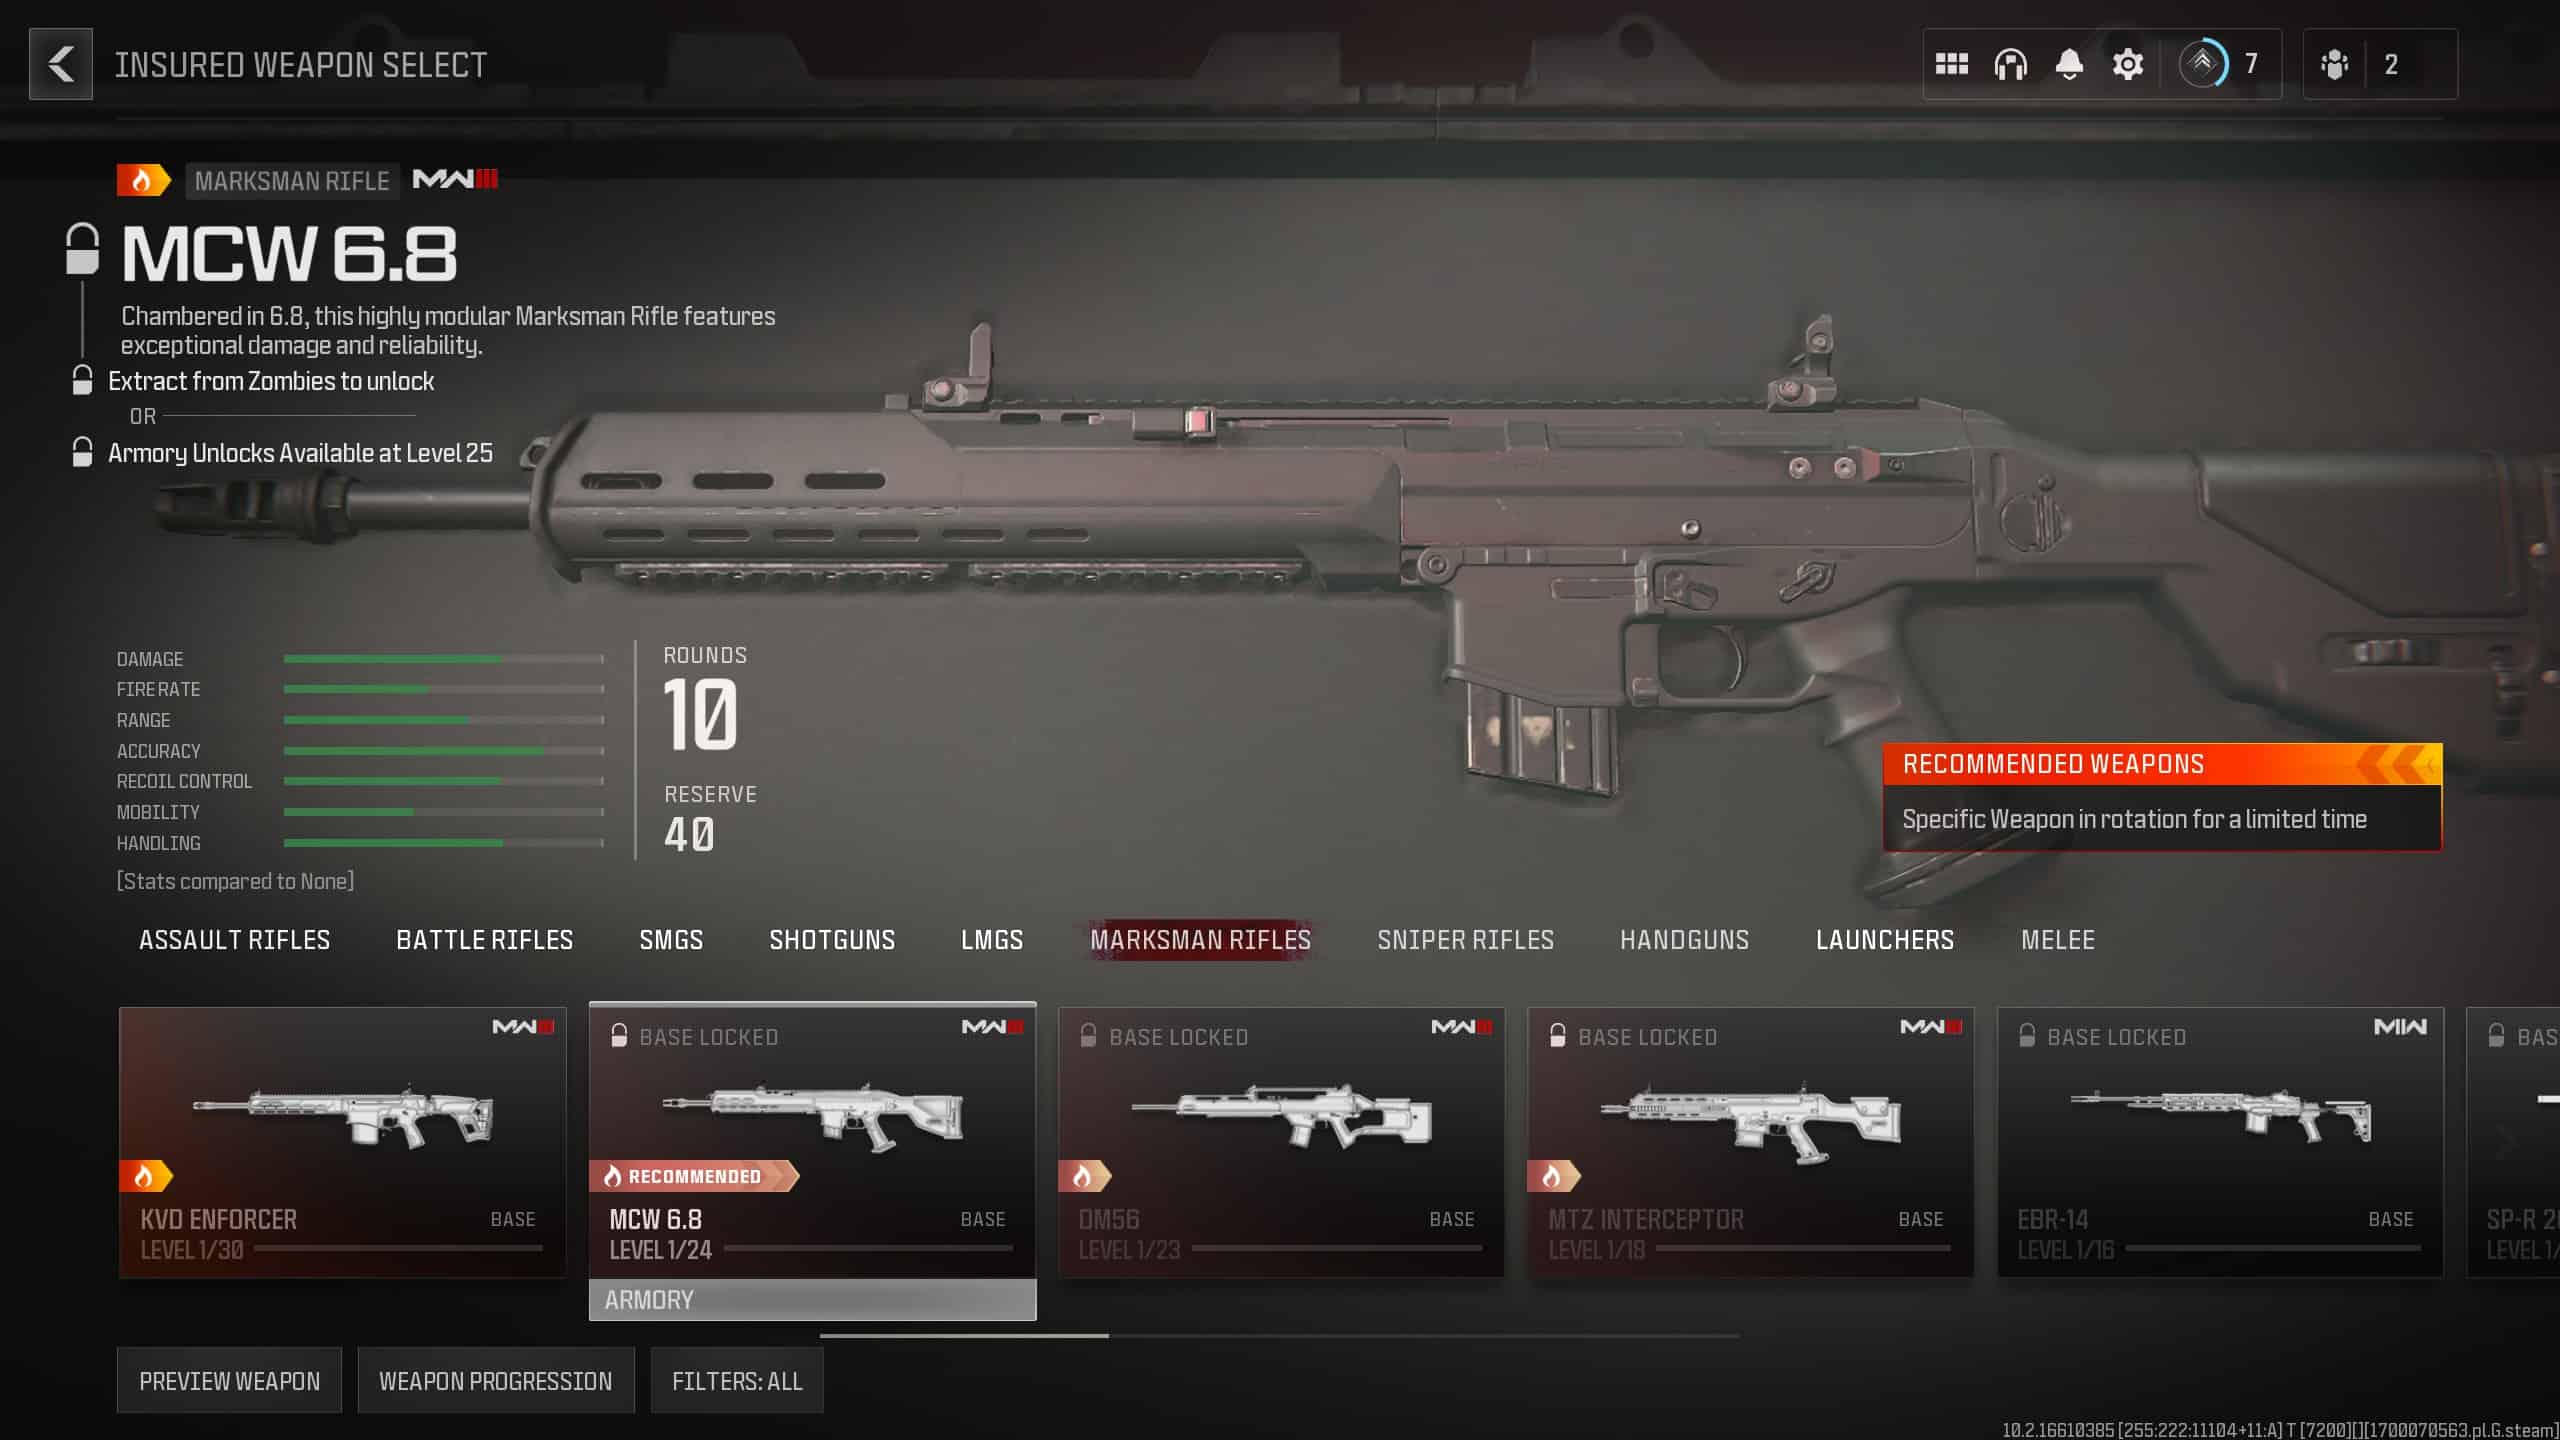 MW3 Zombies weapons: An image of a MCW 6.8 Marksman Rifle in the game.